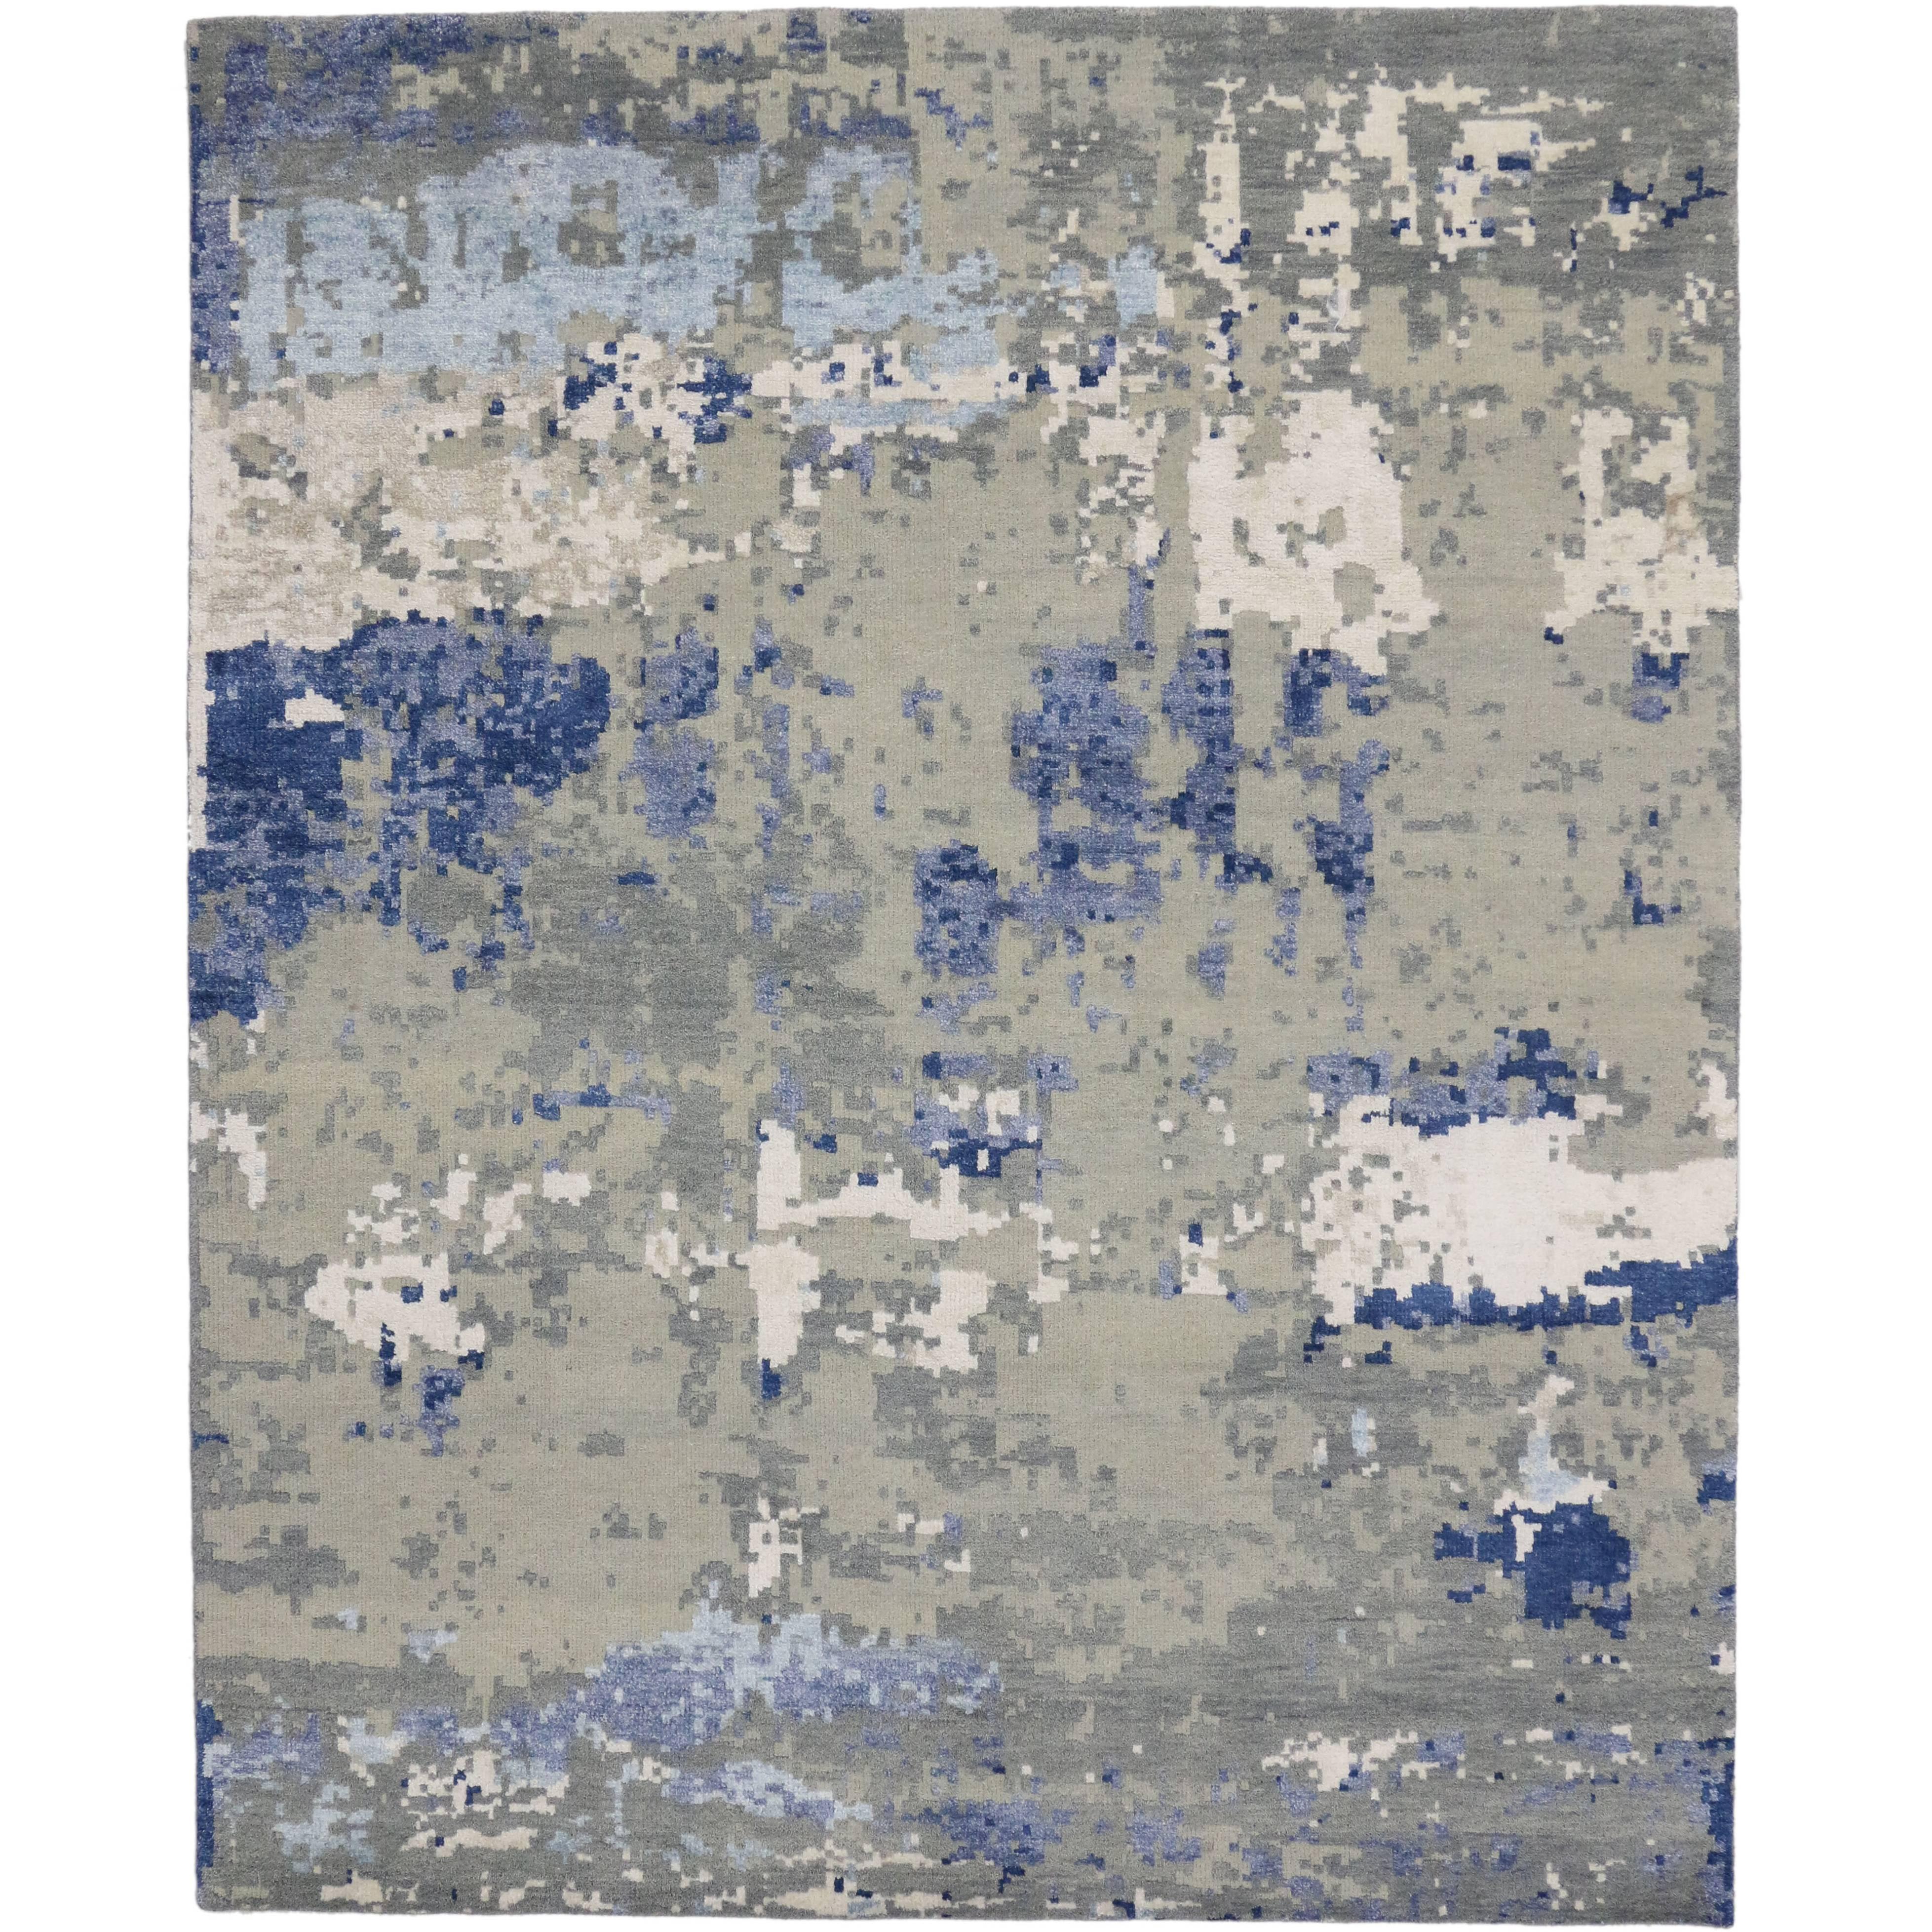 New High and Low Texture Rug with Contemporary Abstract Style